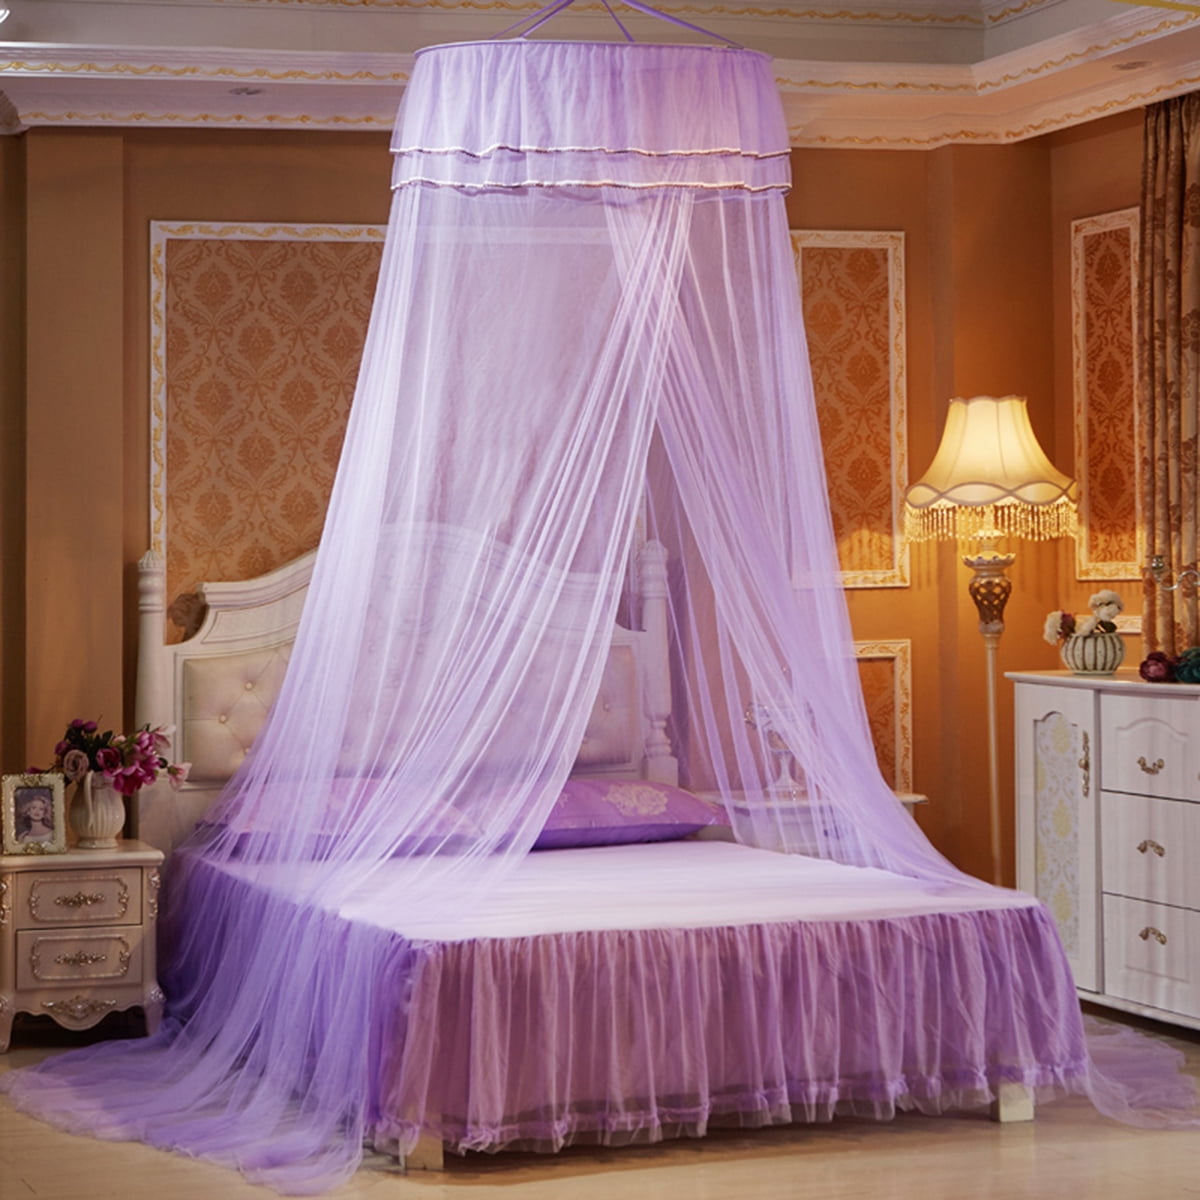 Pink Satin Crown Romantic Mosquito Net Bed Single Double King Midge Fly Canopy 